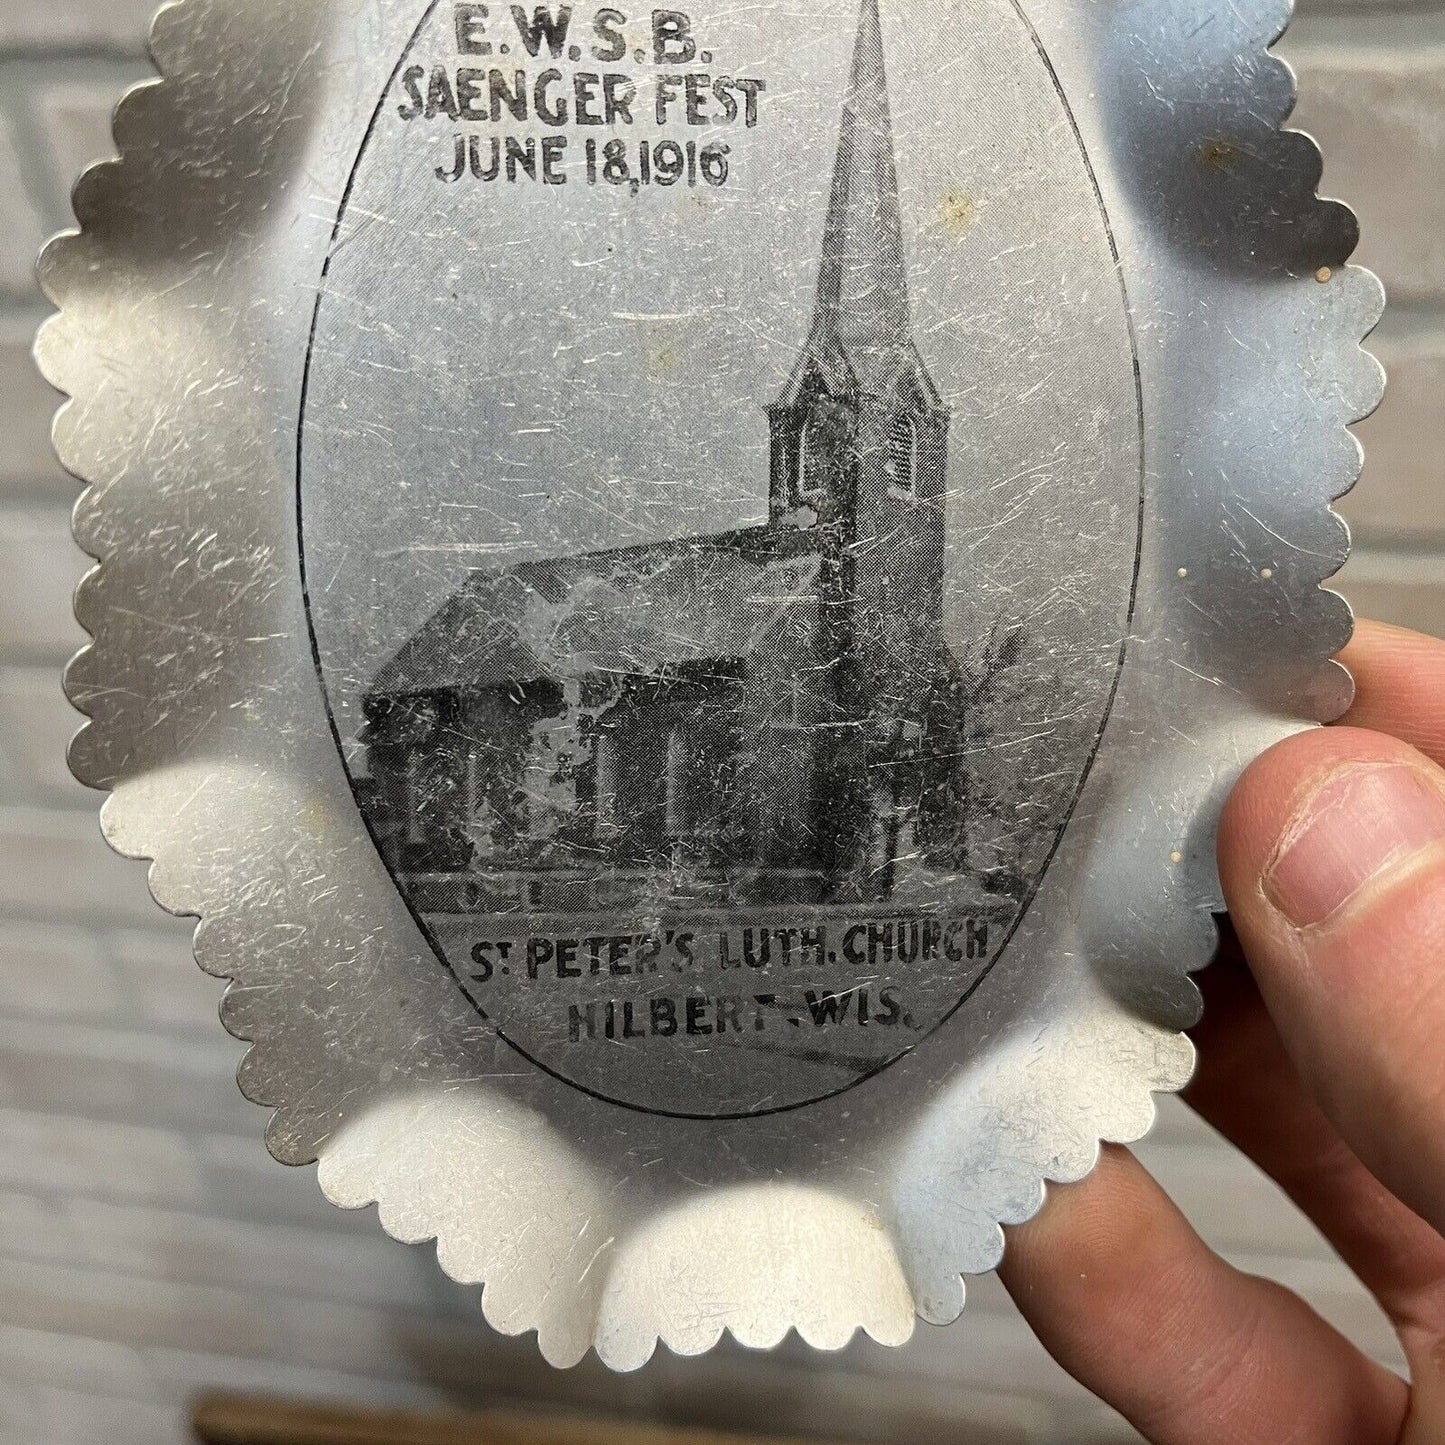 Vintage 1916 St Peters Lutheran Chruch Hilbert Wus Saenger Fest Advertising Tray